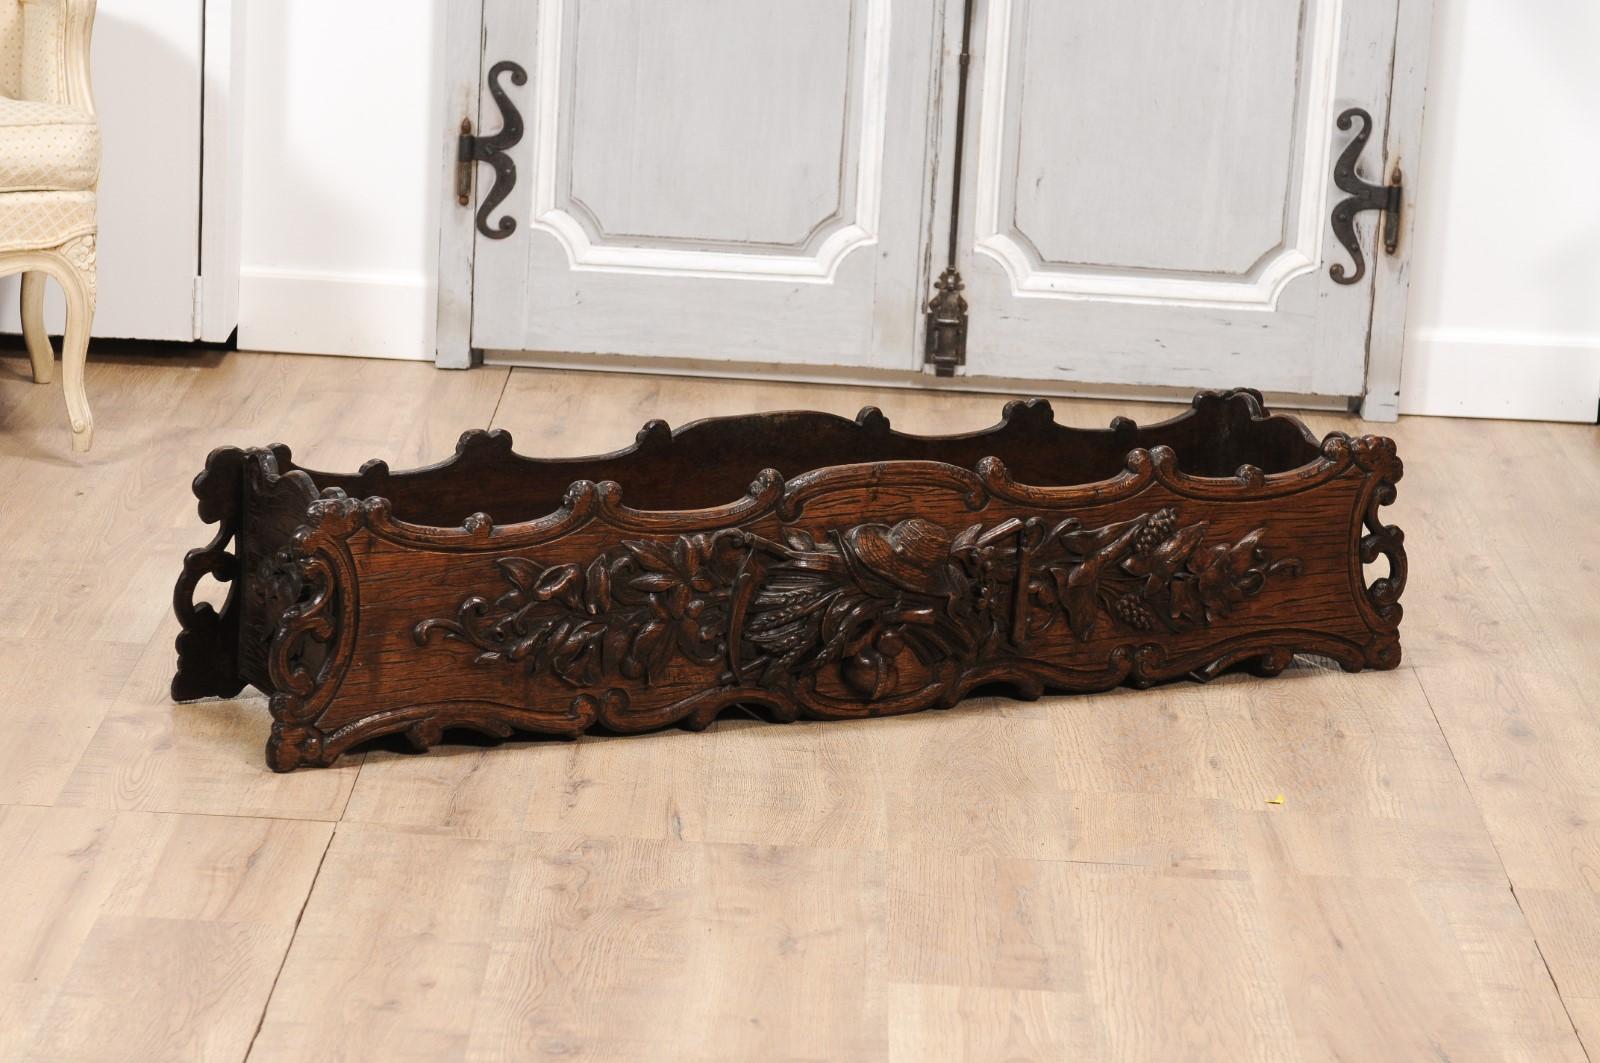 A French oak rectangular planter from circa 1890 with carved gardening-themed frieze in the front. Brimming with charmingly rustic elegance, this French oak rectangular planter from circa 1890 serves as an enchanting homage to gardening. Carved with